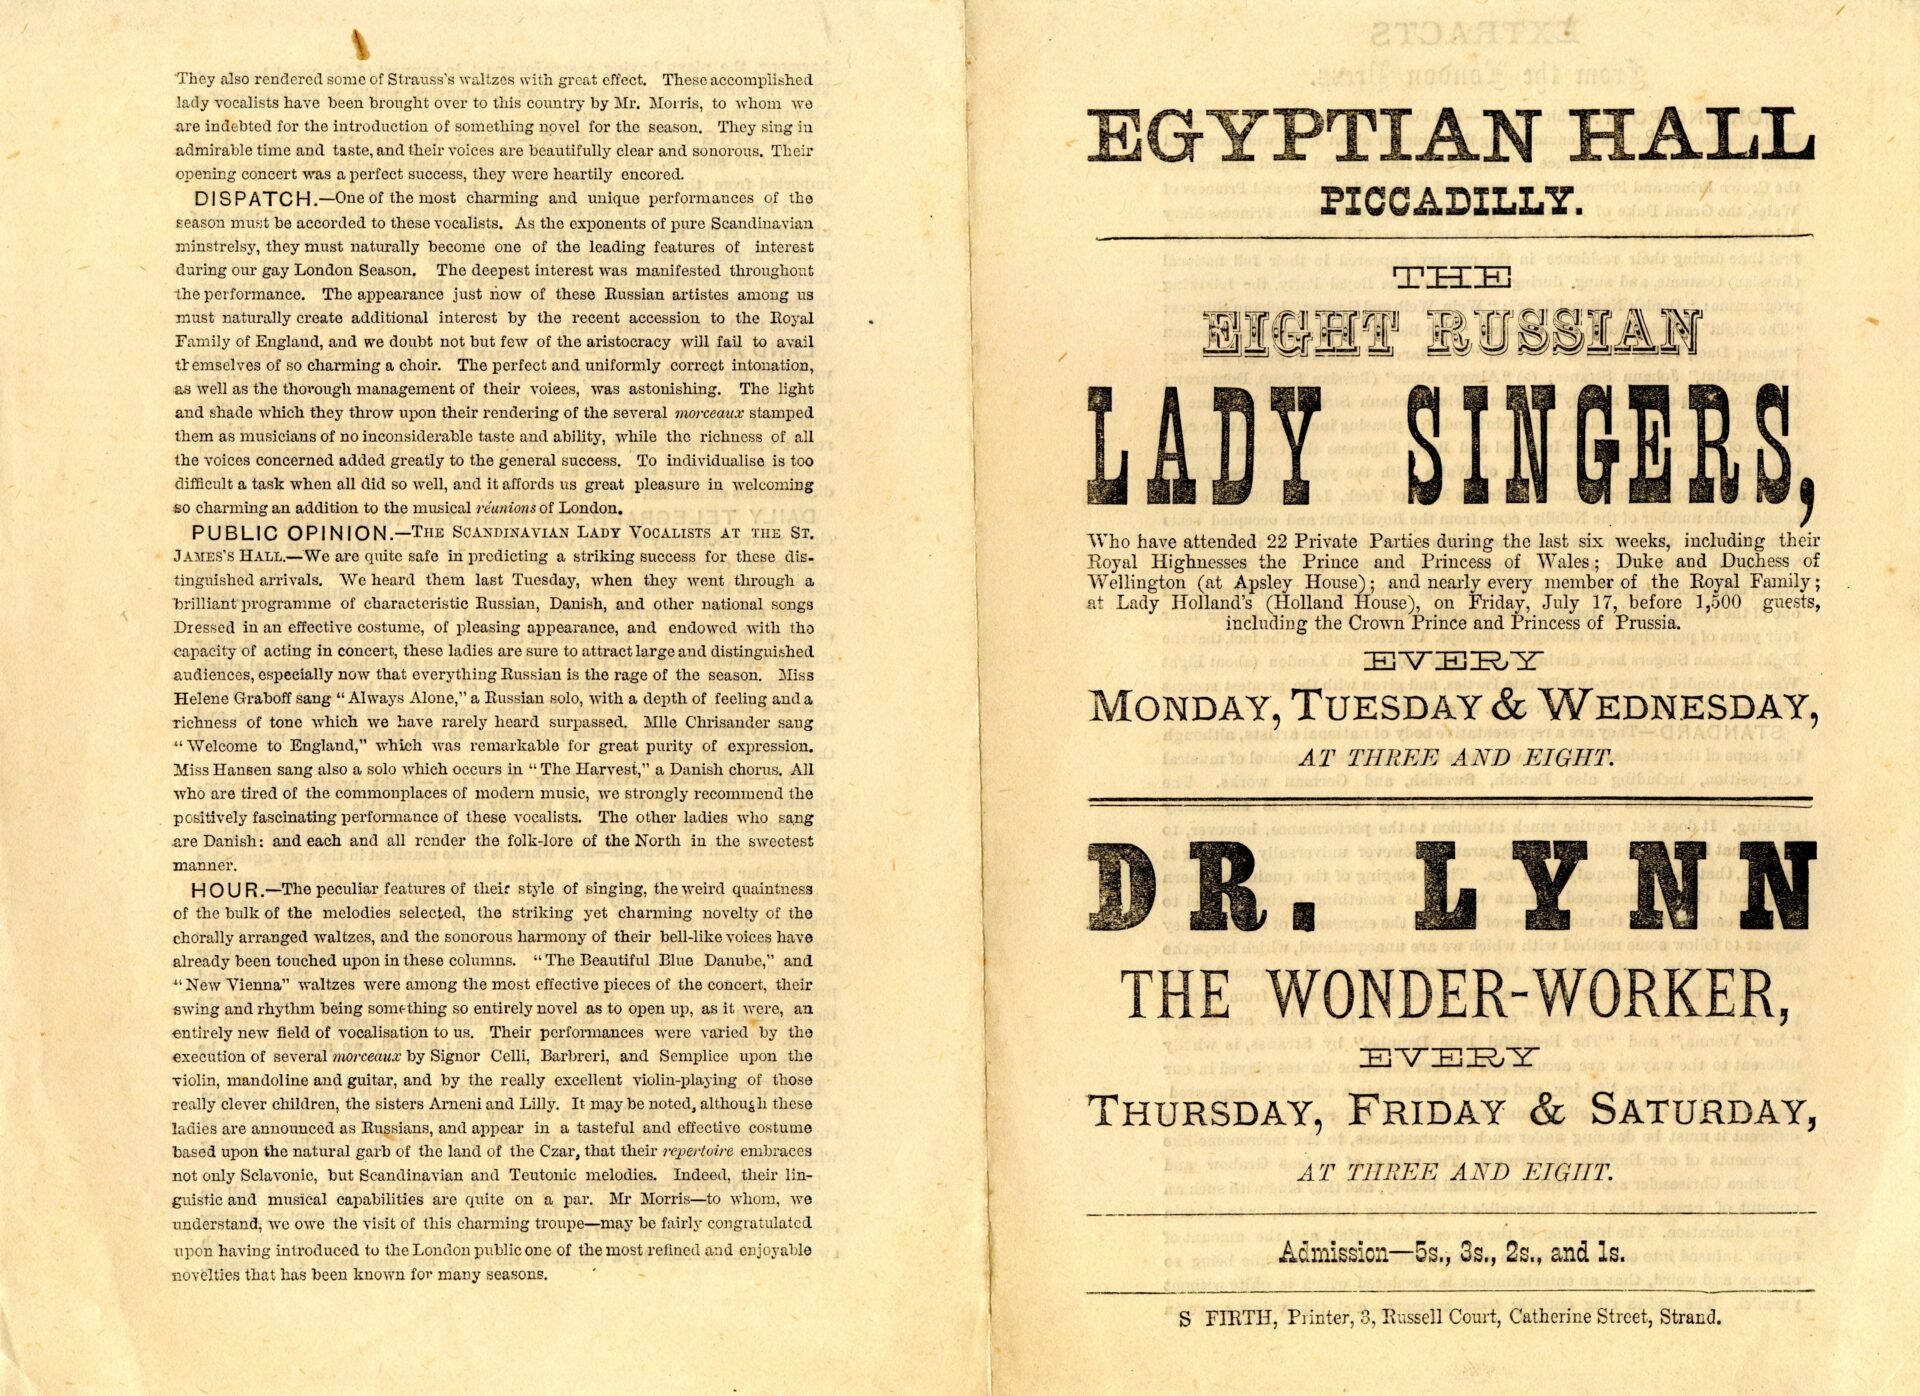 Handout advertising performances of Dr Lynn and Lady Singers at the Egyptian Hall